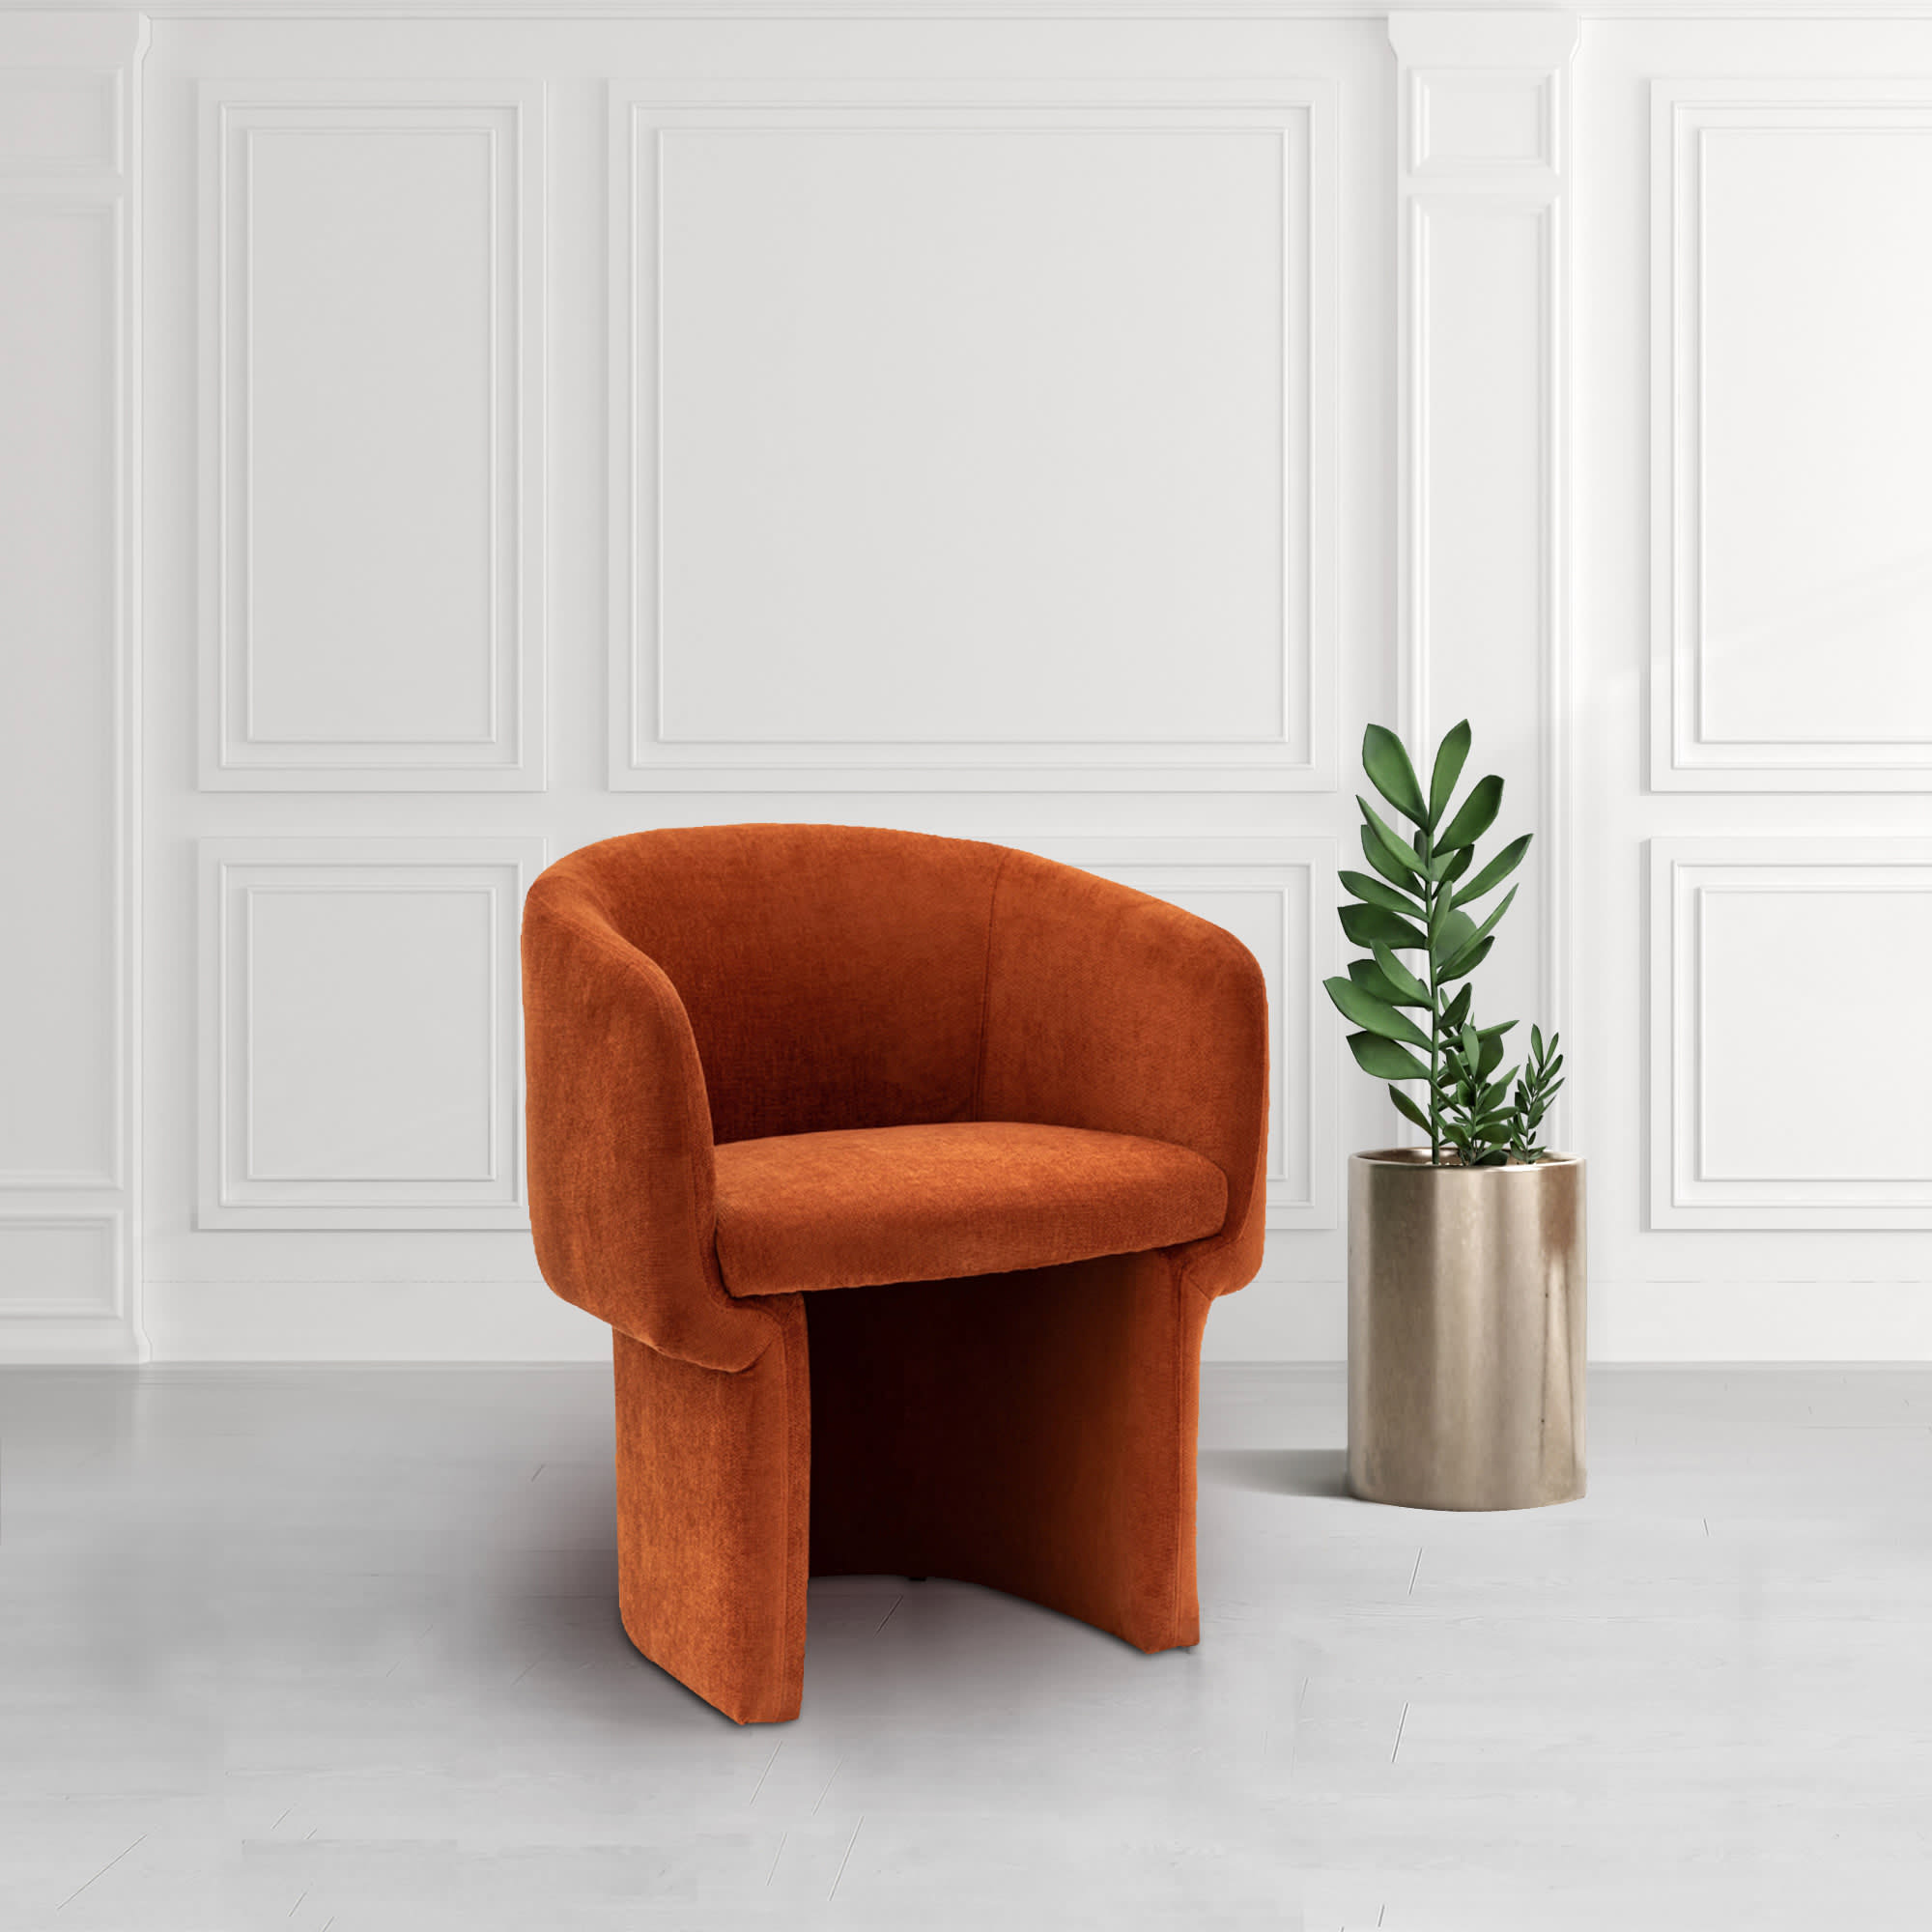 Holm Orange Upholstered Dining Chair by Gallery Direct